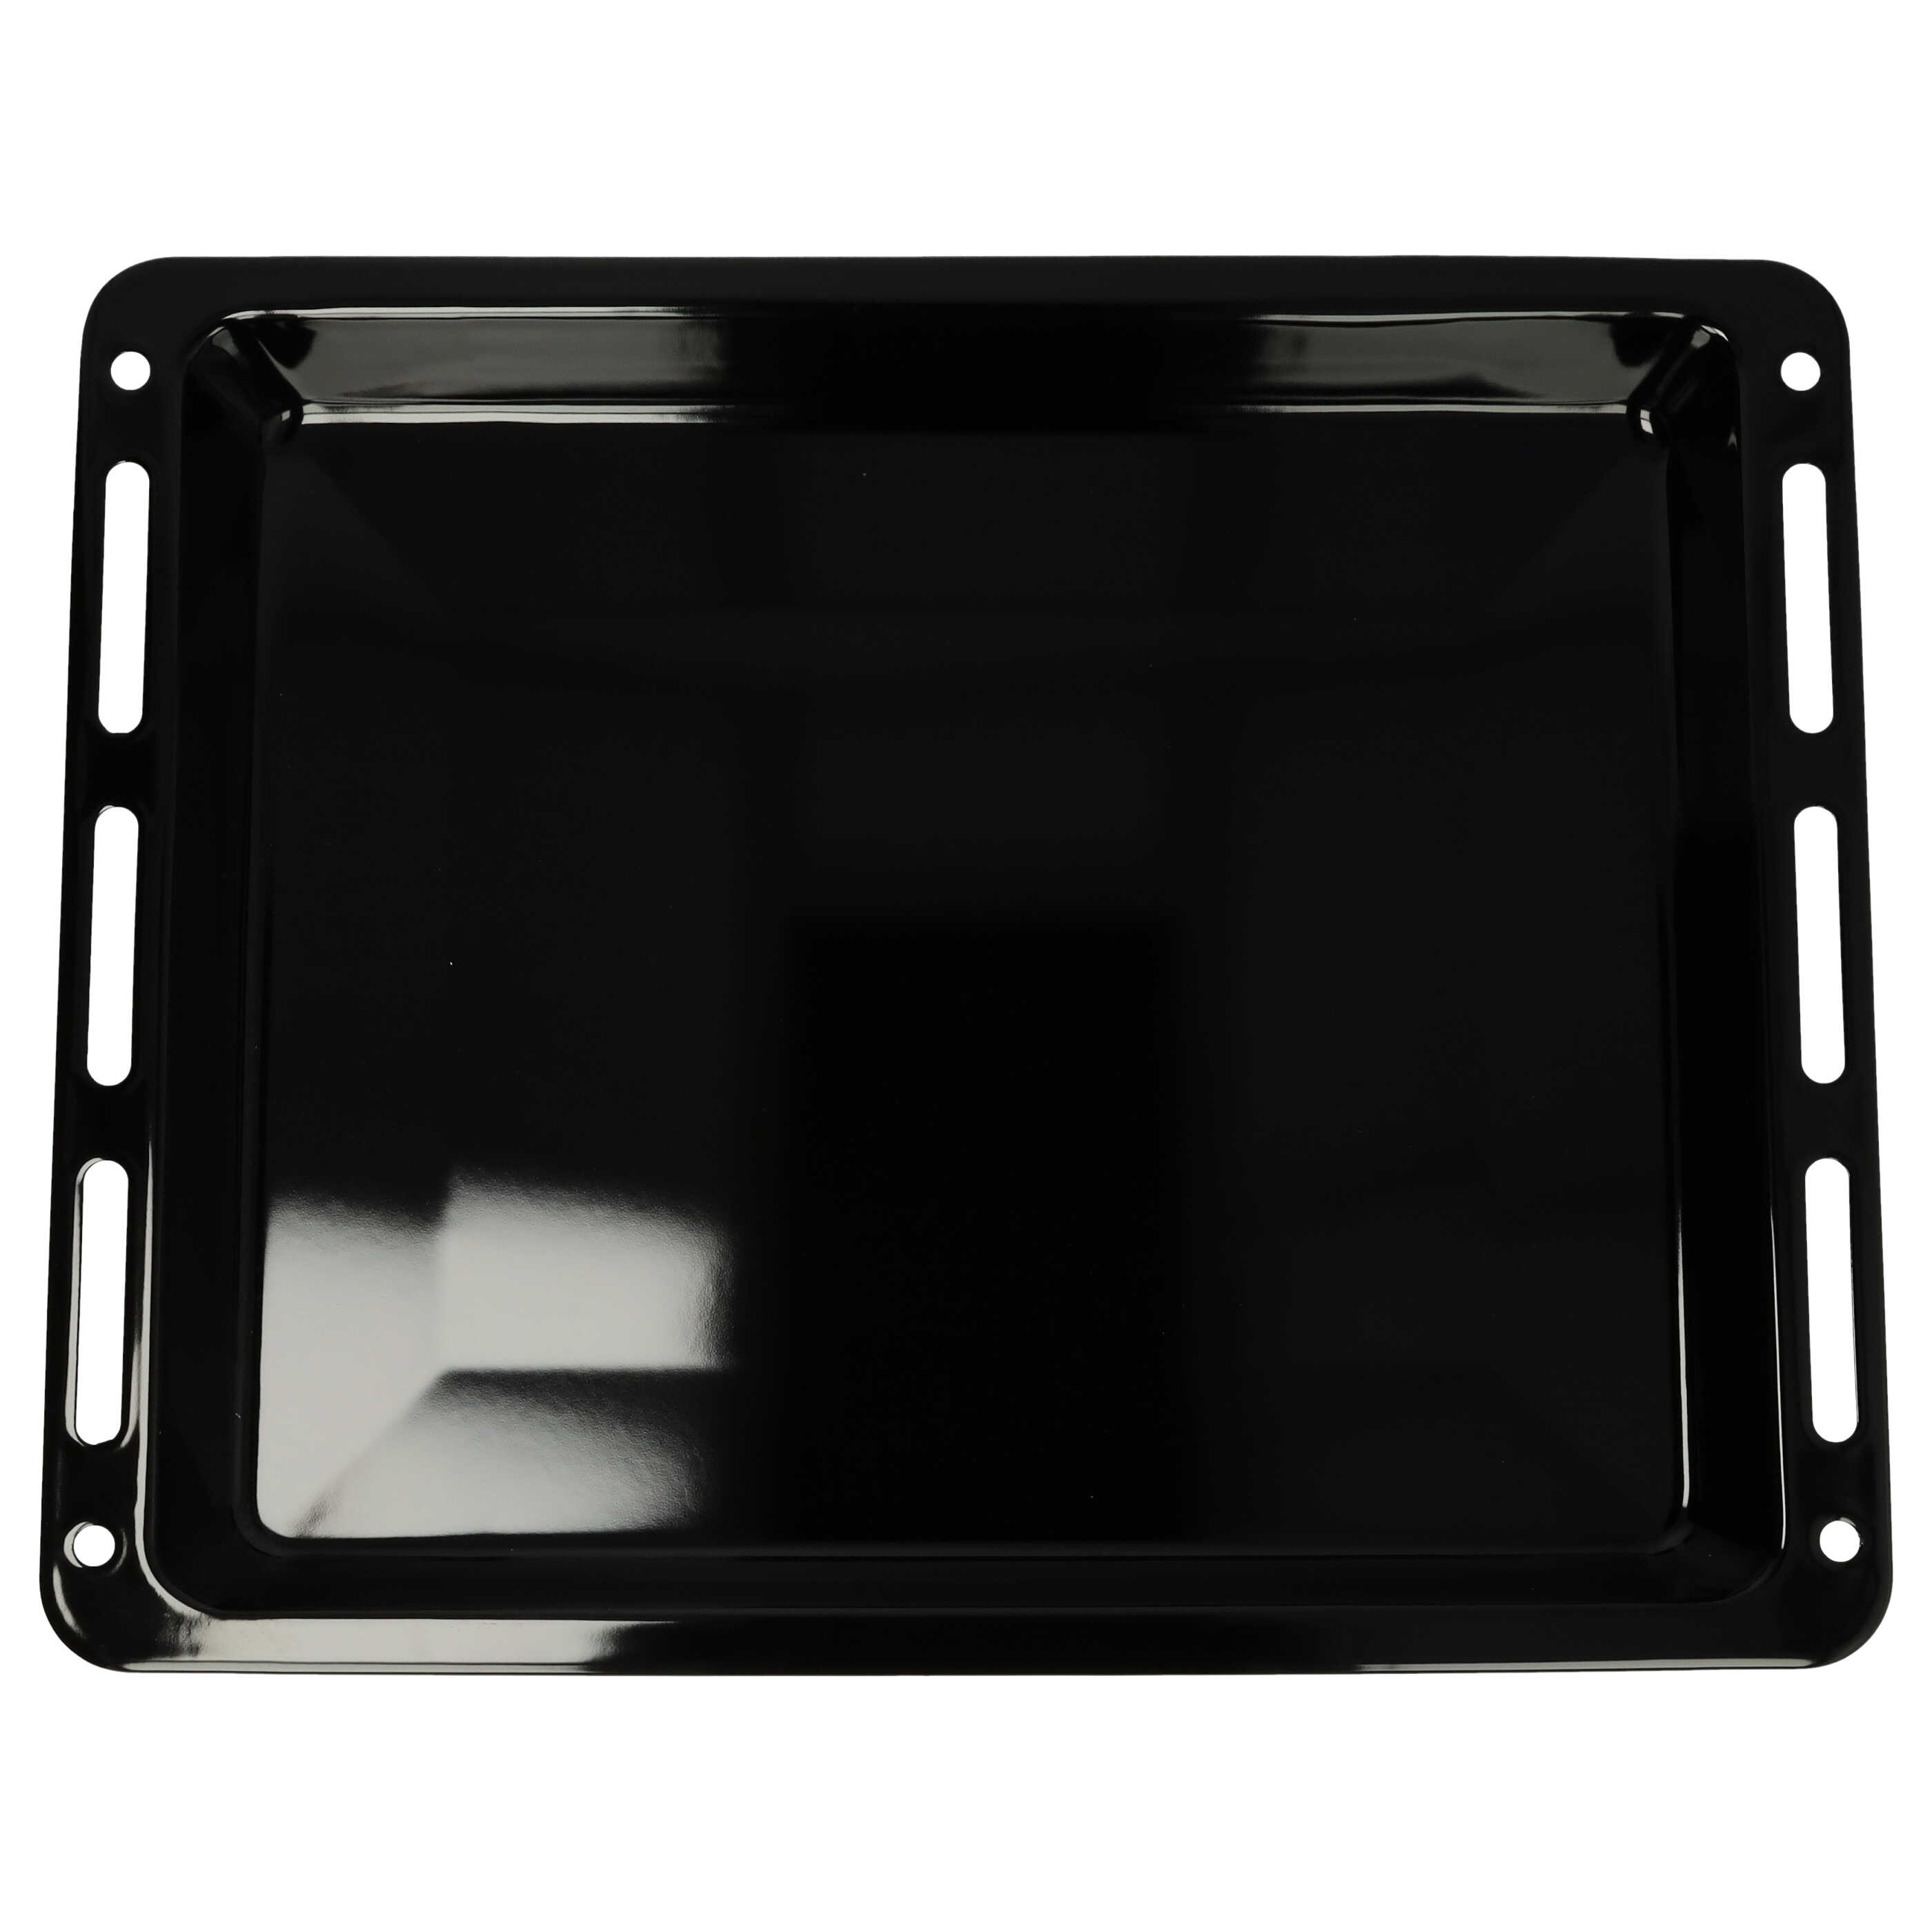 Baking Tray as Replacement for Bosch 11029050, 1101433, HEZ631070 Oven - 45.8 x 36.5 x 4 cm